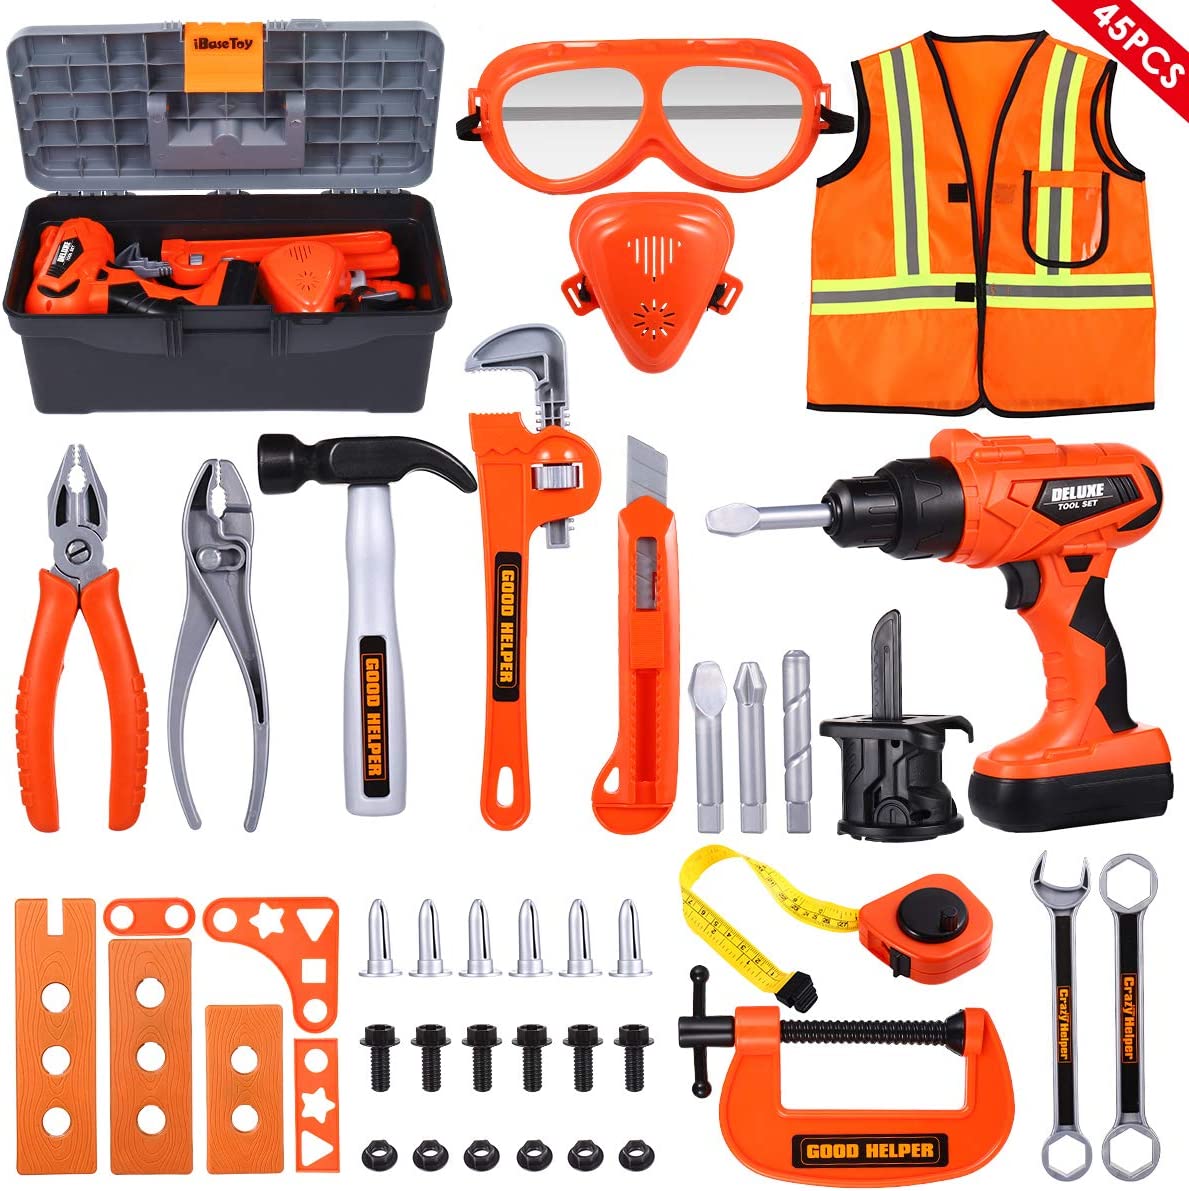 Toy Choi’s Tool Construction Set